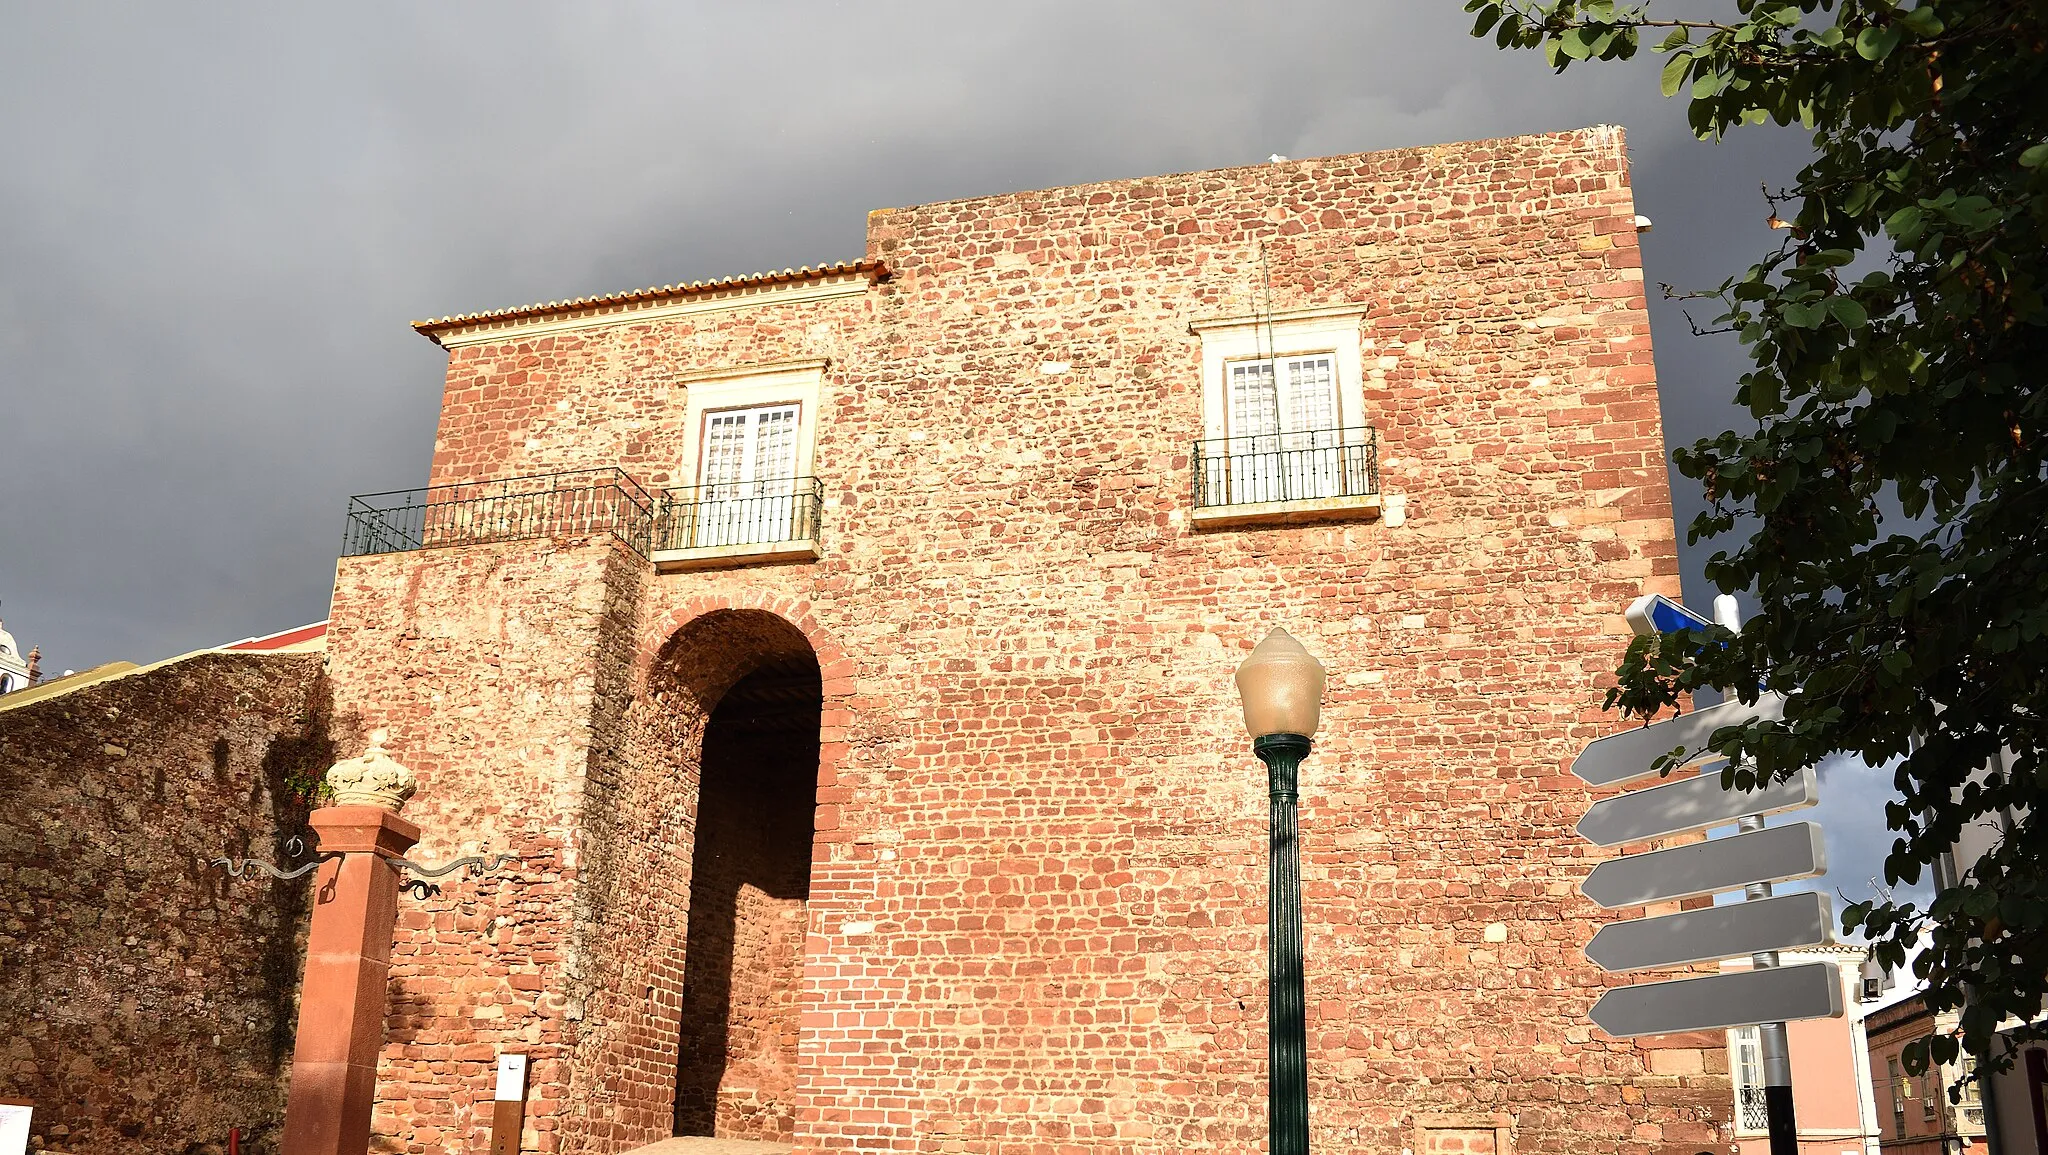 Photo showing: Porta da Cidade (City Gate), in the city of Silves, in southern Portugal. It was built after the definitive reconquer of Silves by the christians, and during several centuries was the main entrance of the town. It is also known as the Almedina Gate, located nearby, that was the main entrance during the islamic era.